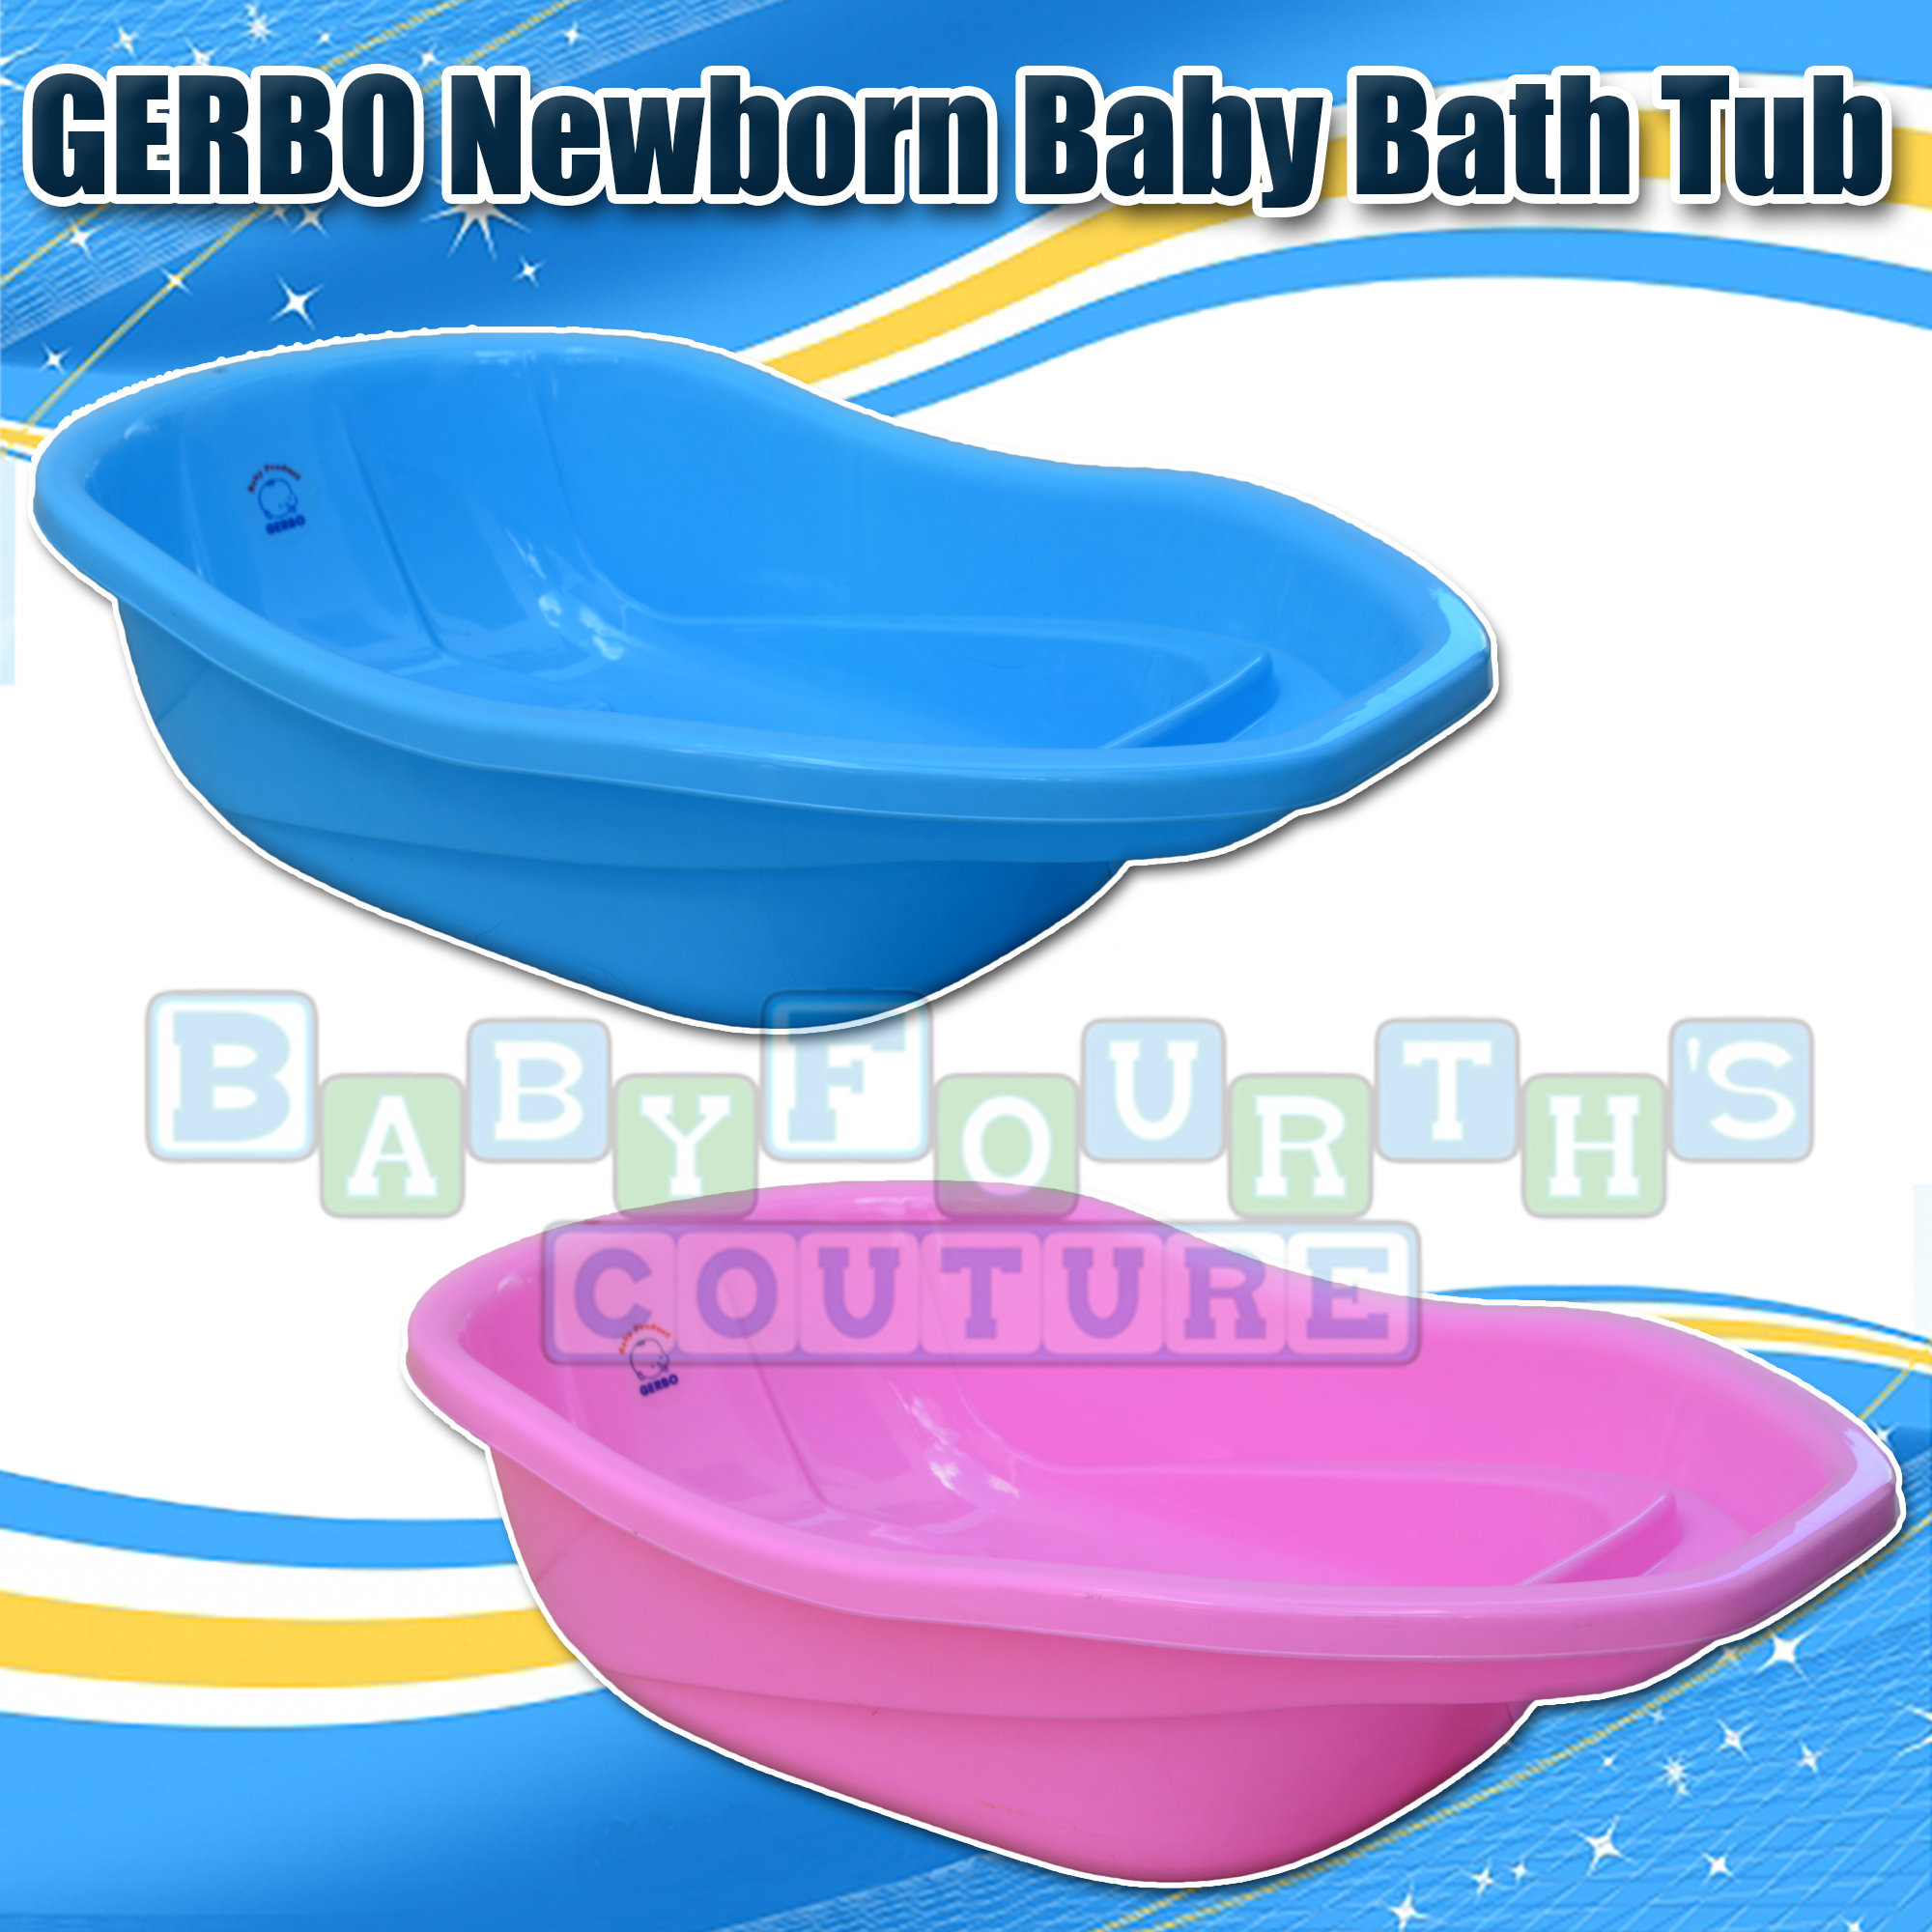 Baby Fourths Couture Gerbo Baby Bath 